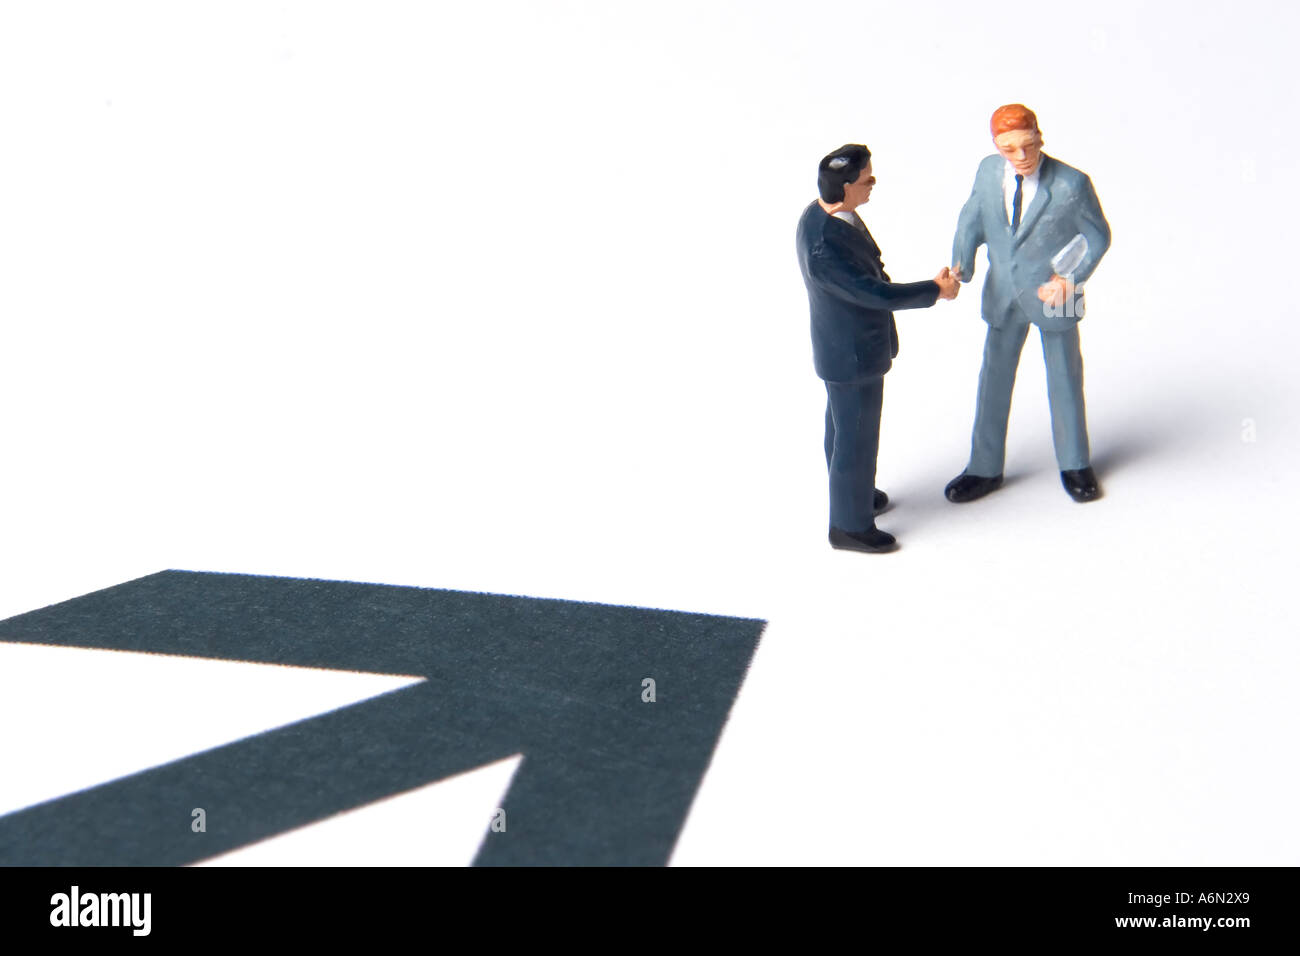 Business figurines shaking hands next to an arrow Stock Photo